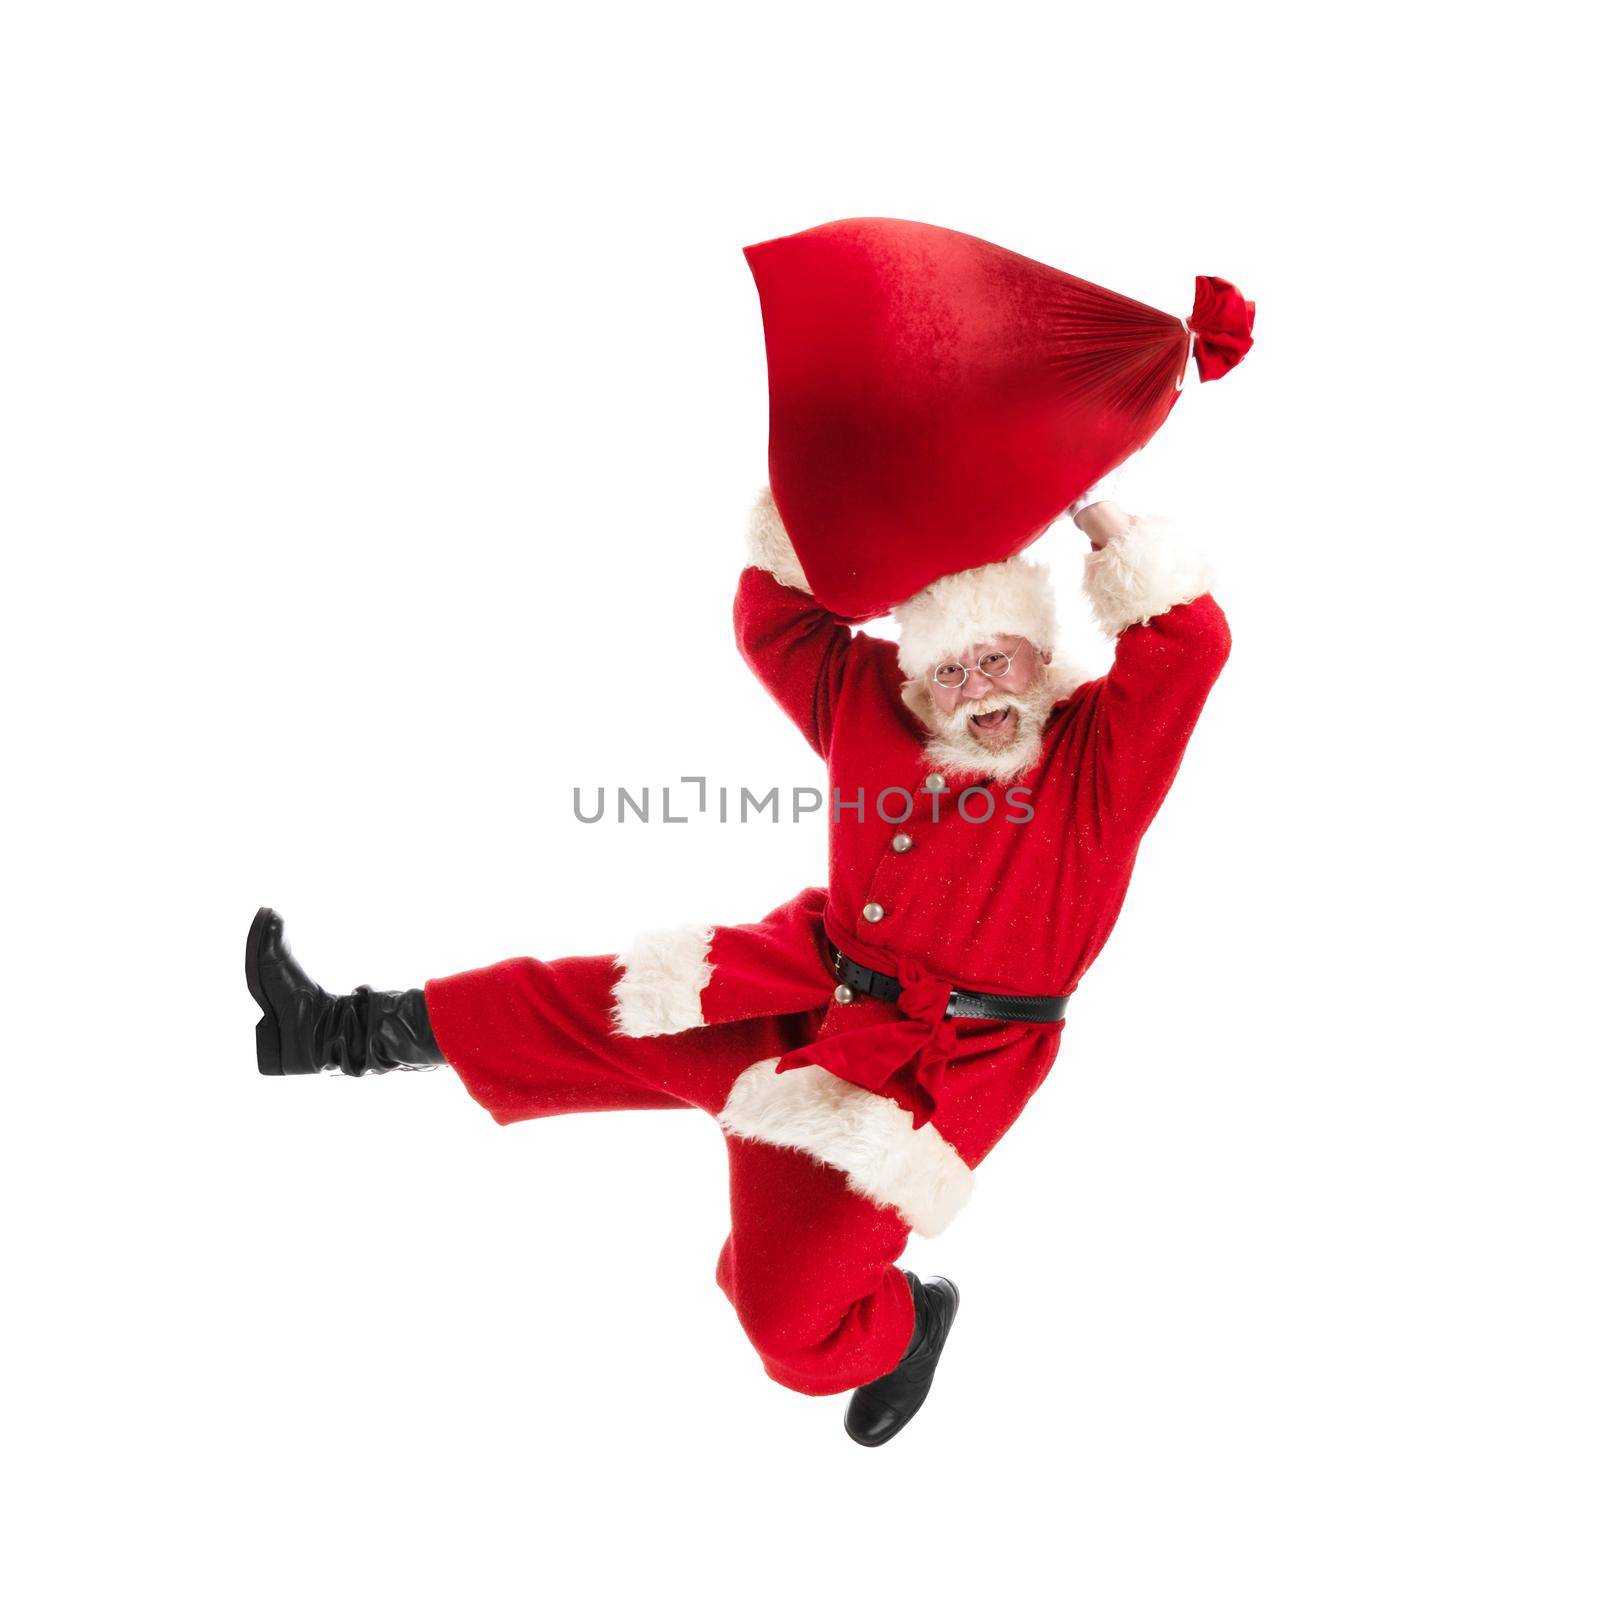 Santa Claus jump with gifts bag by ALotOfPeople